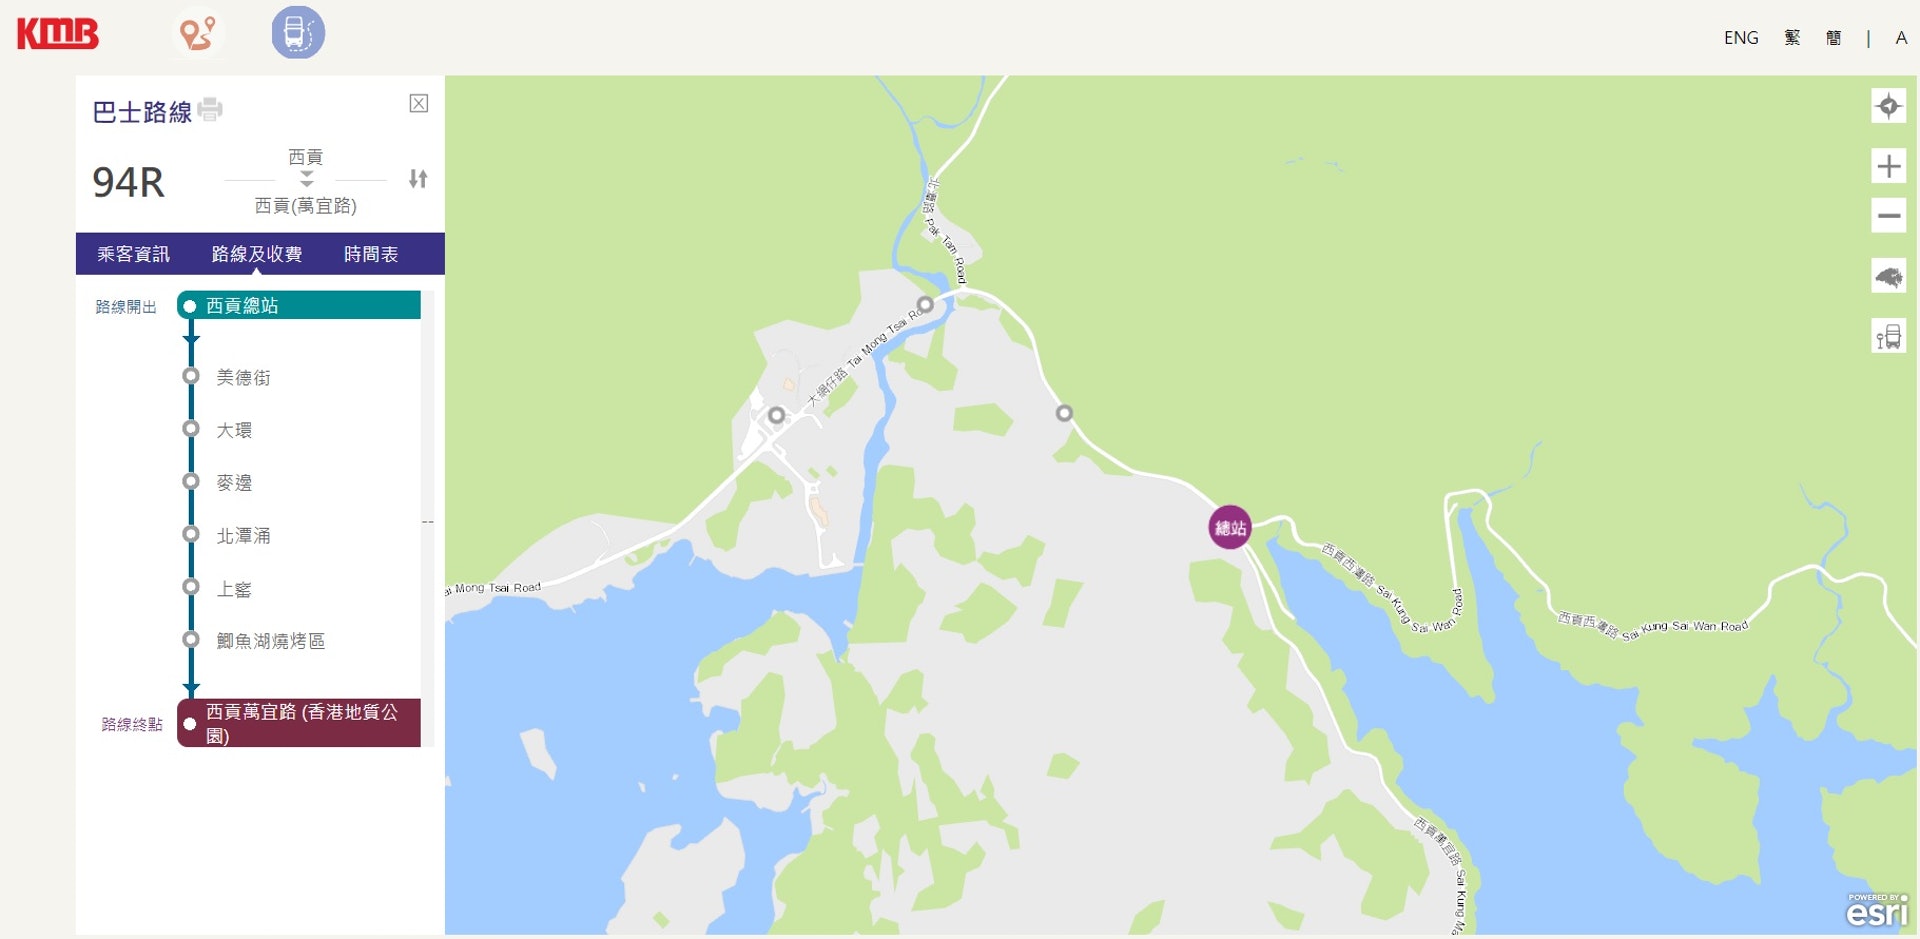 A 94R route was found on the KMB website, which runs between Sai Kung and Sai Kung Man Yi Road (Hong Kong Geopark).  (Screenshot of KMB website)